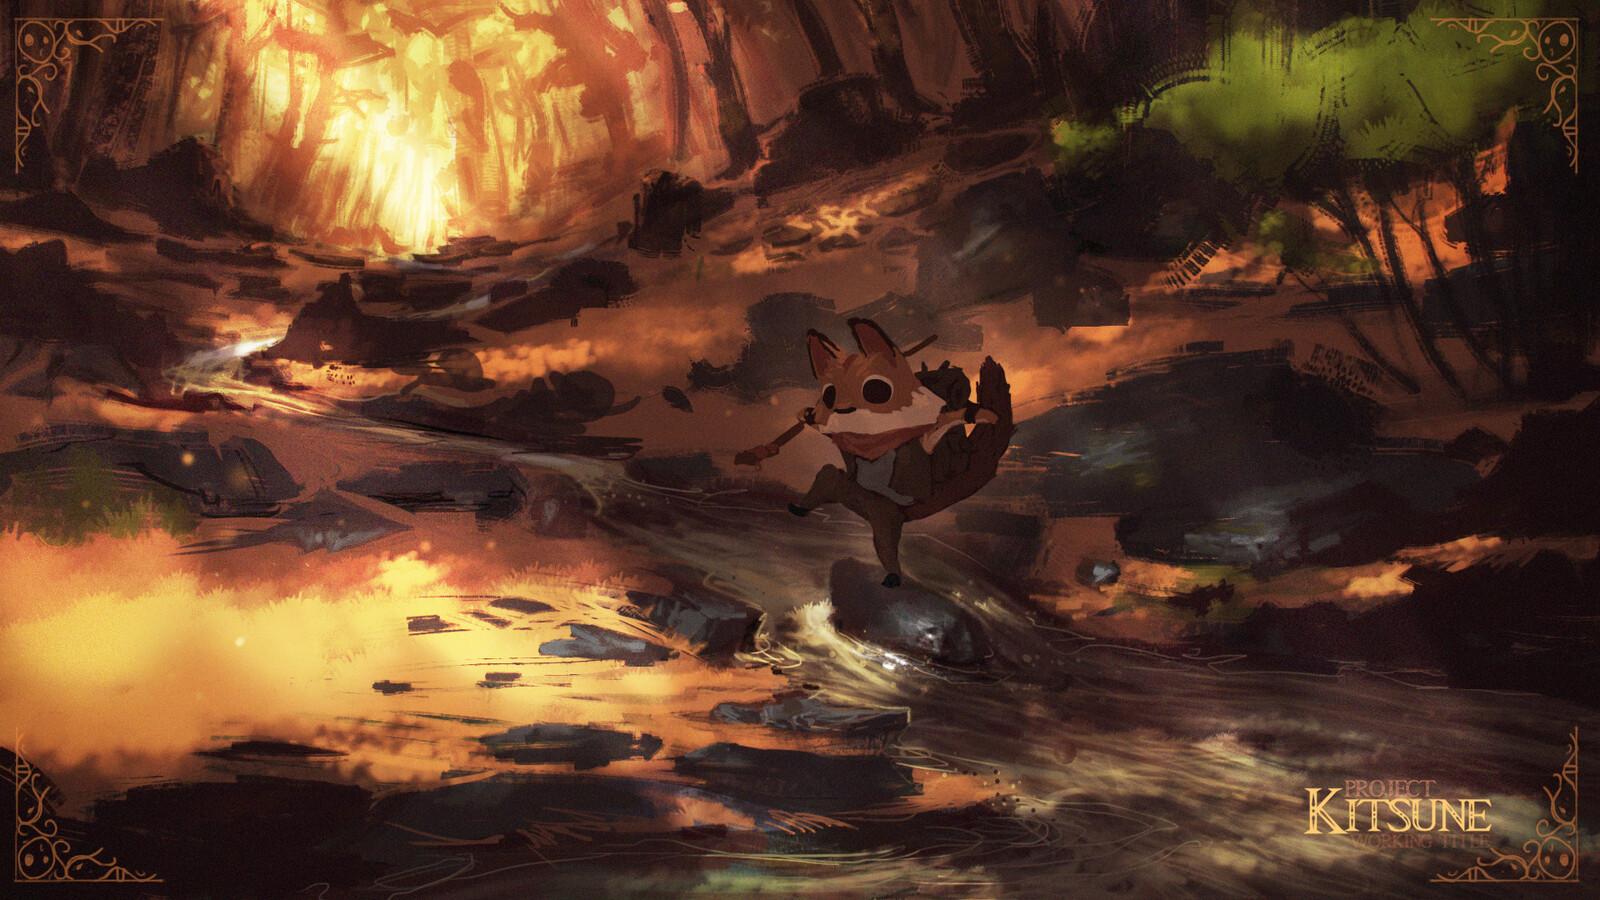 Crossing the stream. Scenic Speedpaint of the young fox leaving his home.